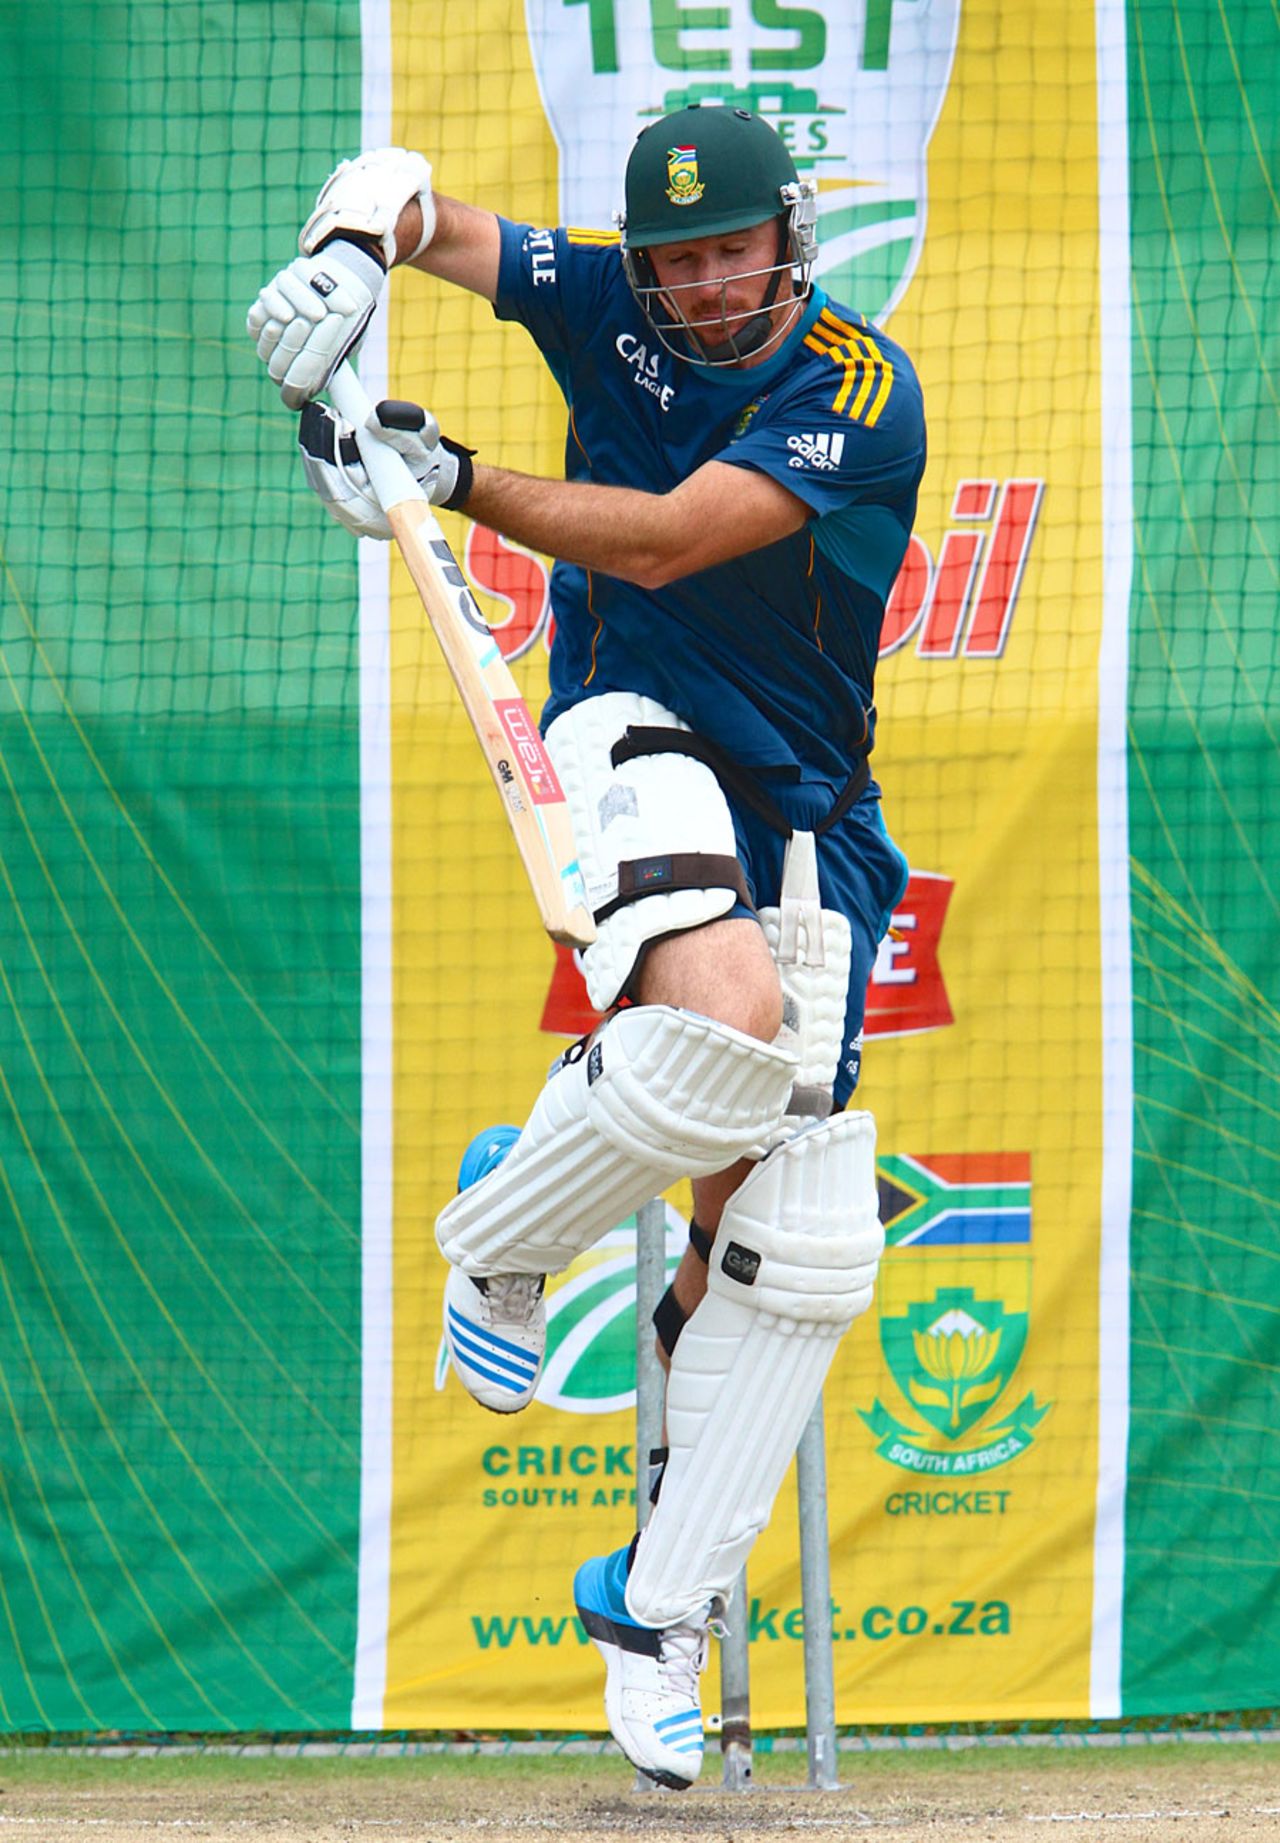 Ready for Mitchell? Graeme Smith gets a working over in the nets, Port Elizabeth, February 19, 2014